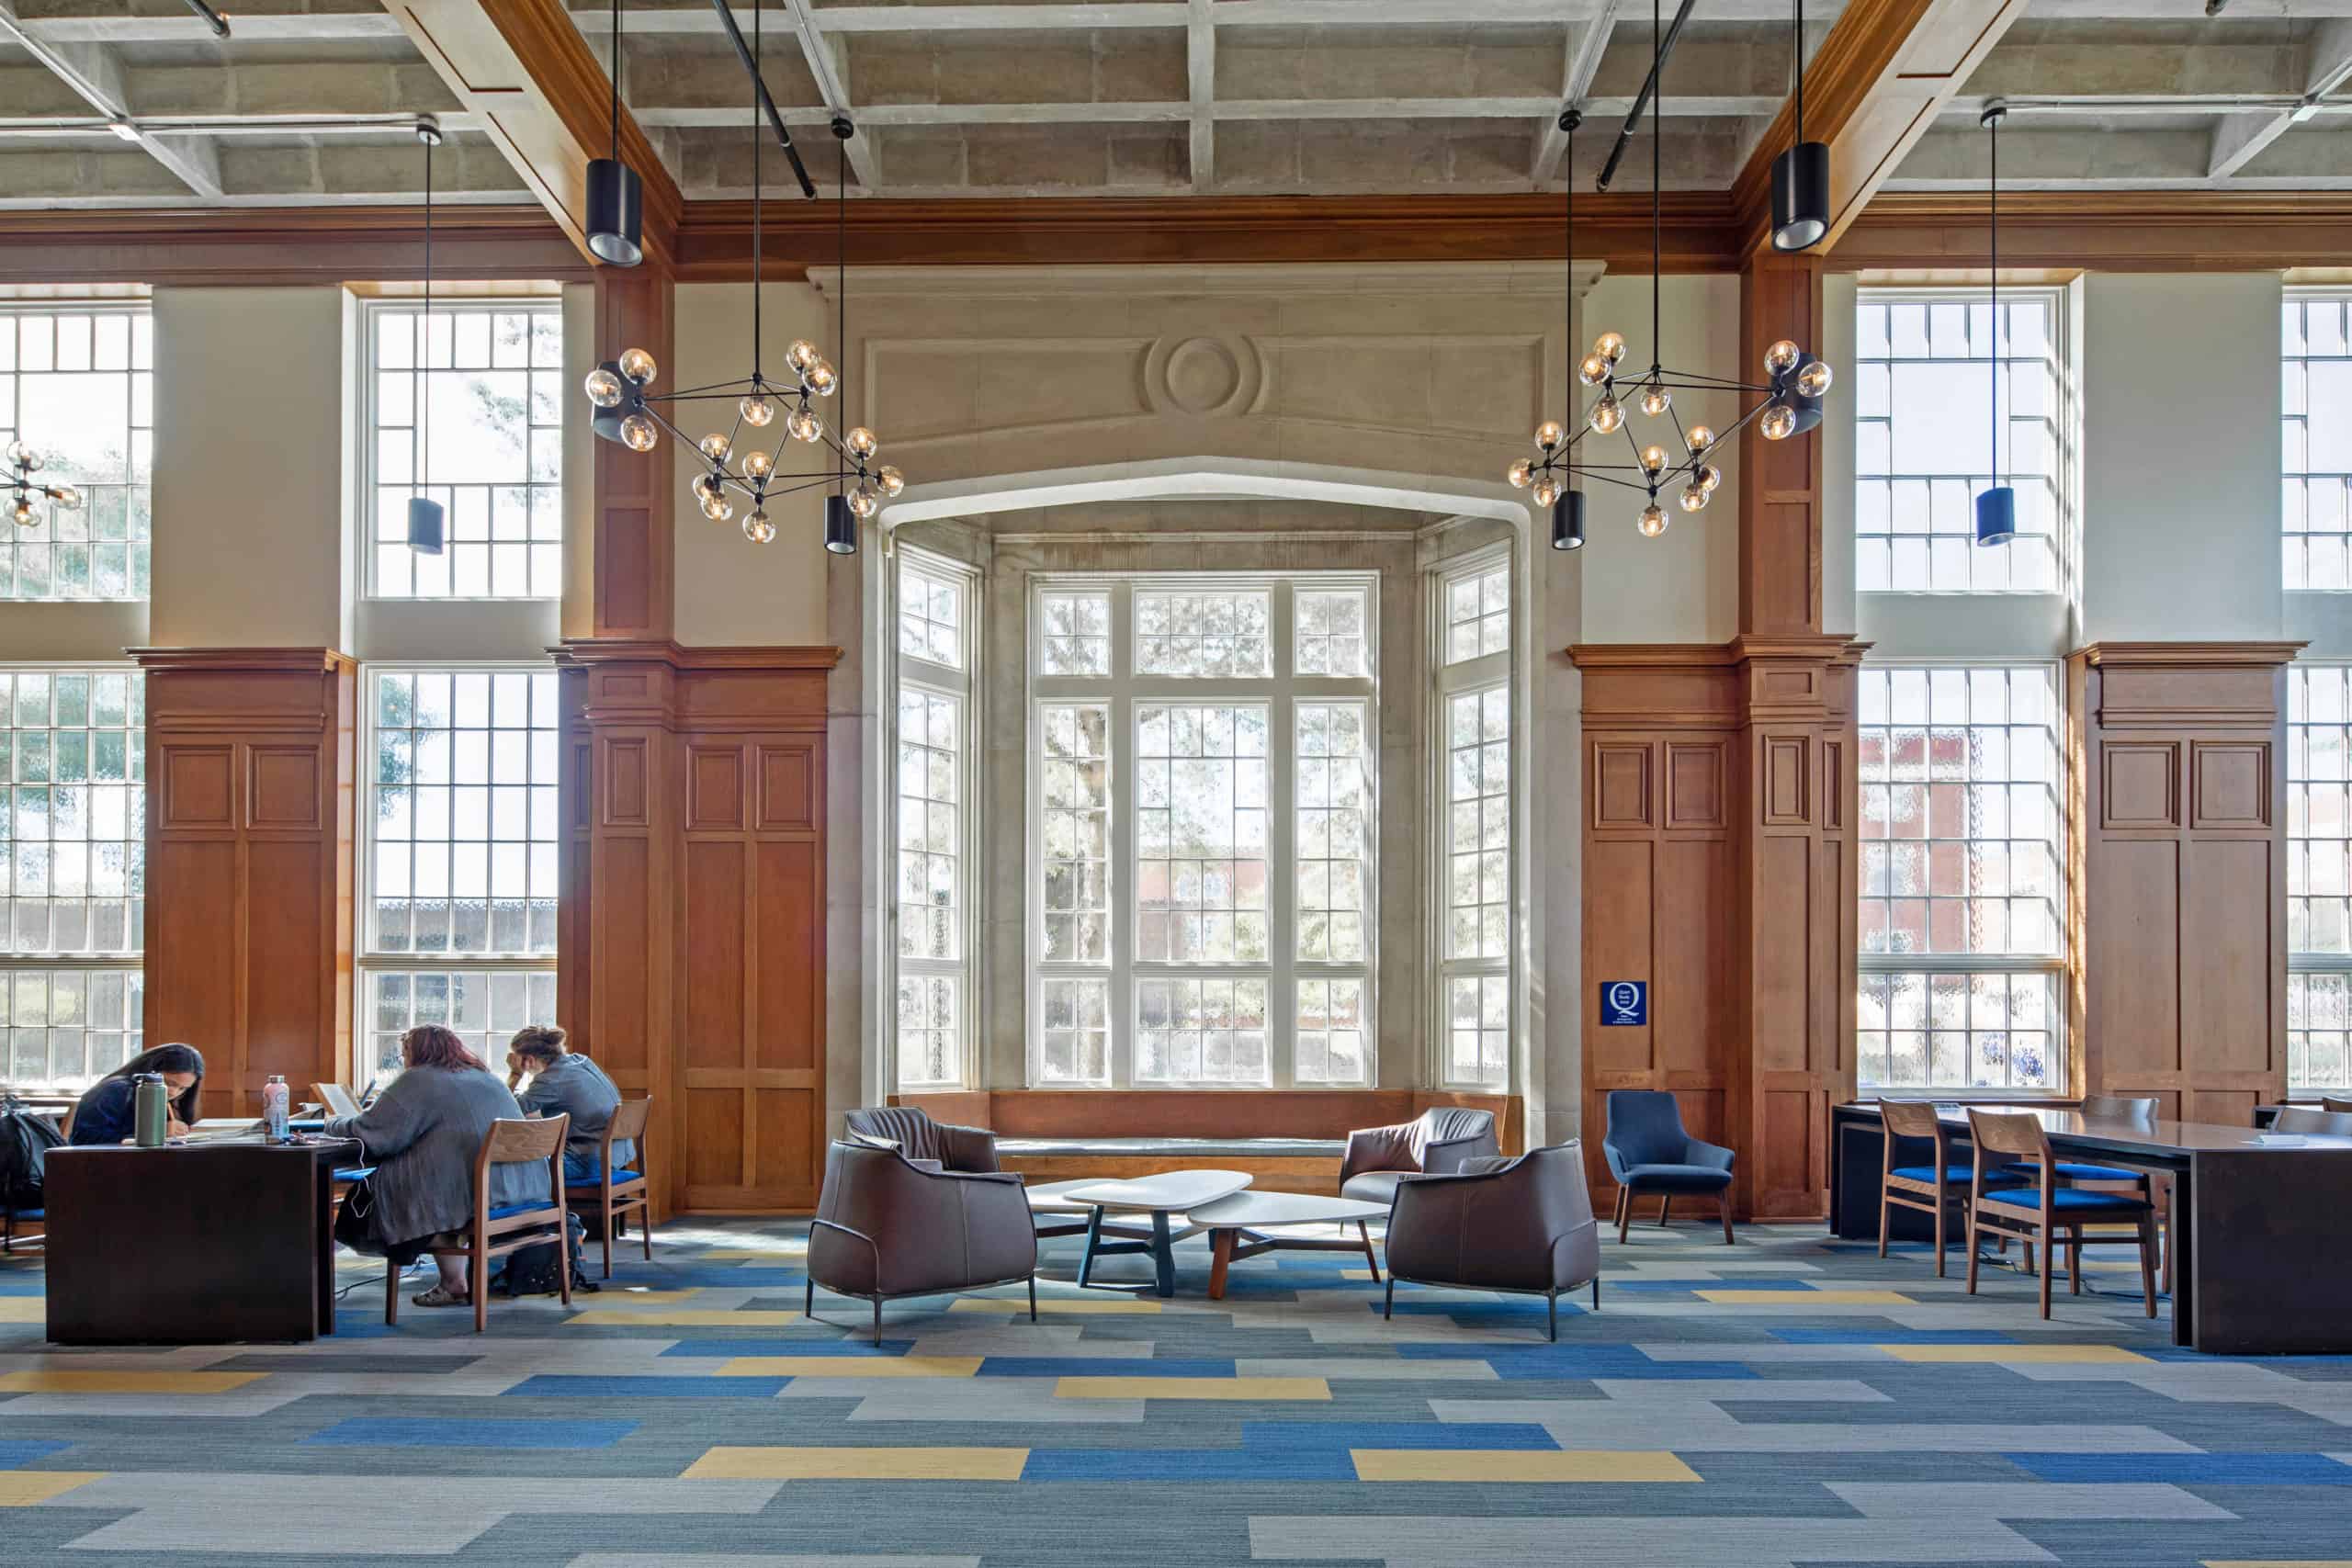 A large room with traditional, carved wood wall paneling, concrete casted walls, modern furniture and light fixtures, stained glass, and students working. This photo is to demonstrate the preservation and modernization that HK Architects implemented in the Guerry Center at the University of Tennessee at Chattanooga. 